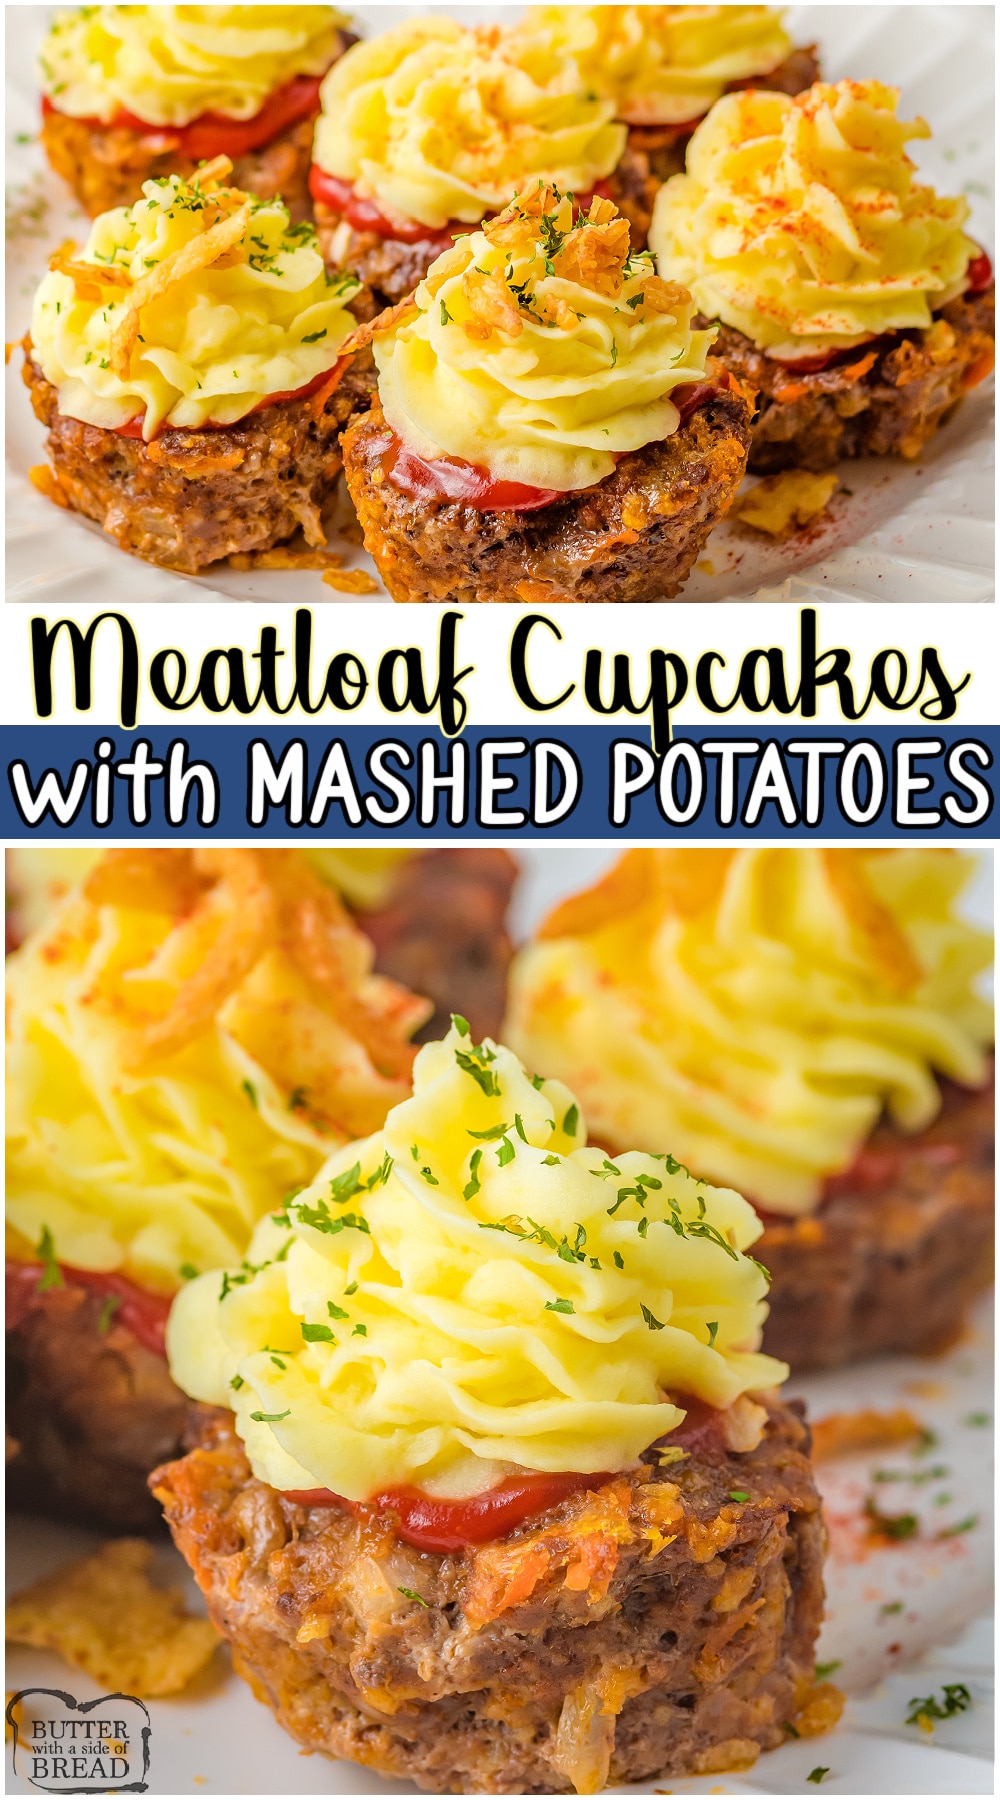 Meatloaf cupcake recipe made with a fantastic blend of ground beef, sausage & savory seasonings, made into mini meatloaves, topped with mashed potatoes! #meatloaf #beef #potatoes #dinner #easyrecipe from BUTTER WITH A SIDE OF BREAD